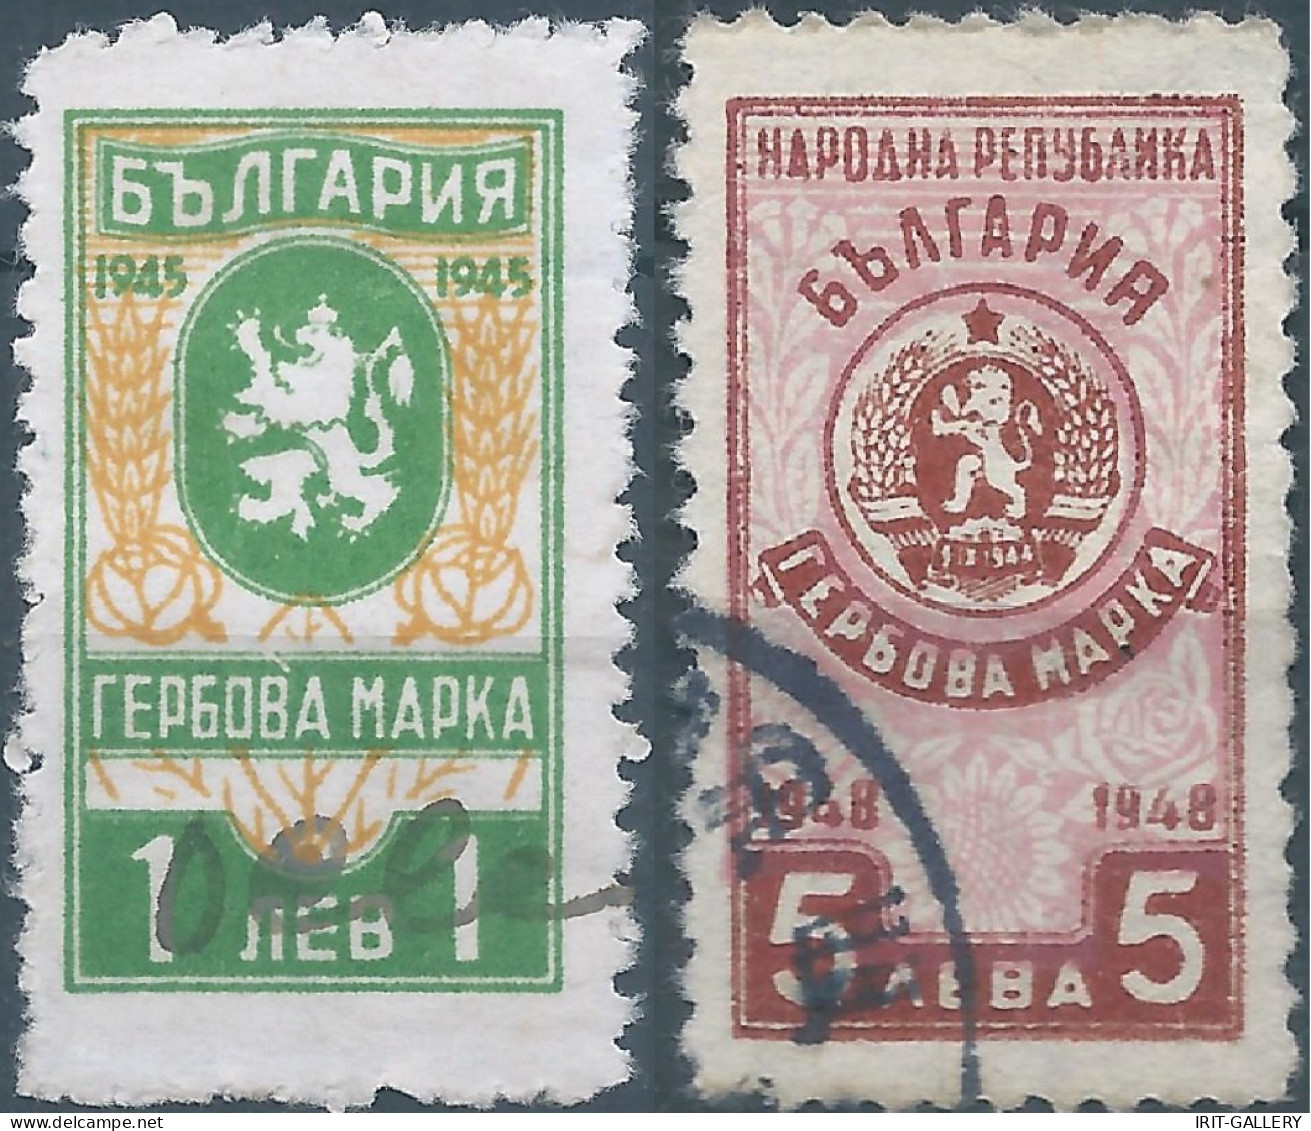 Bulgaria - Bulgarien - Bulgare,1945 - 1948 Revenue Stamps Fiscal Tax,Obliterated - Official Stamps